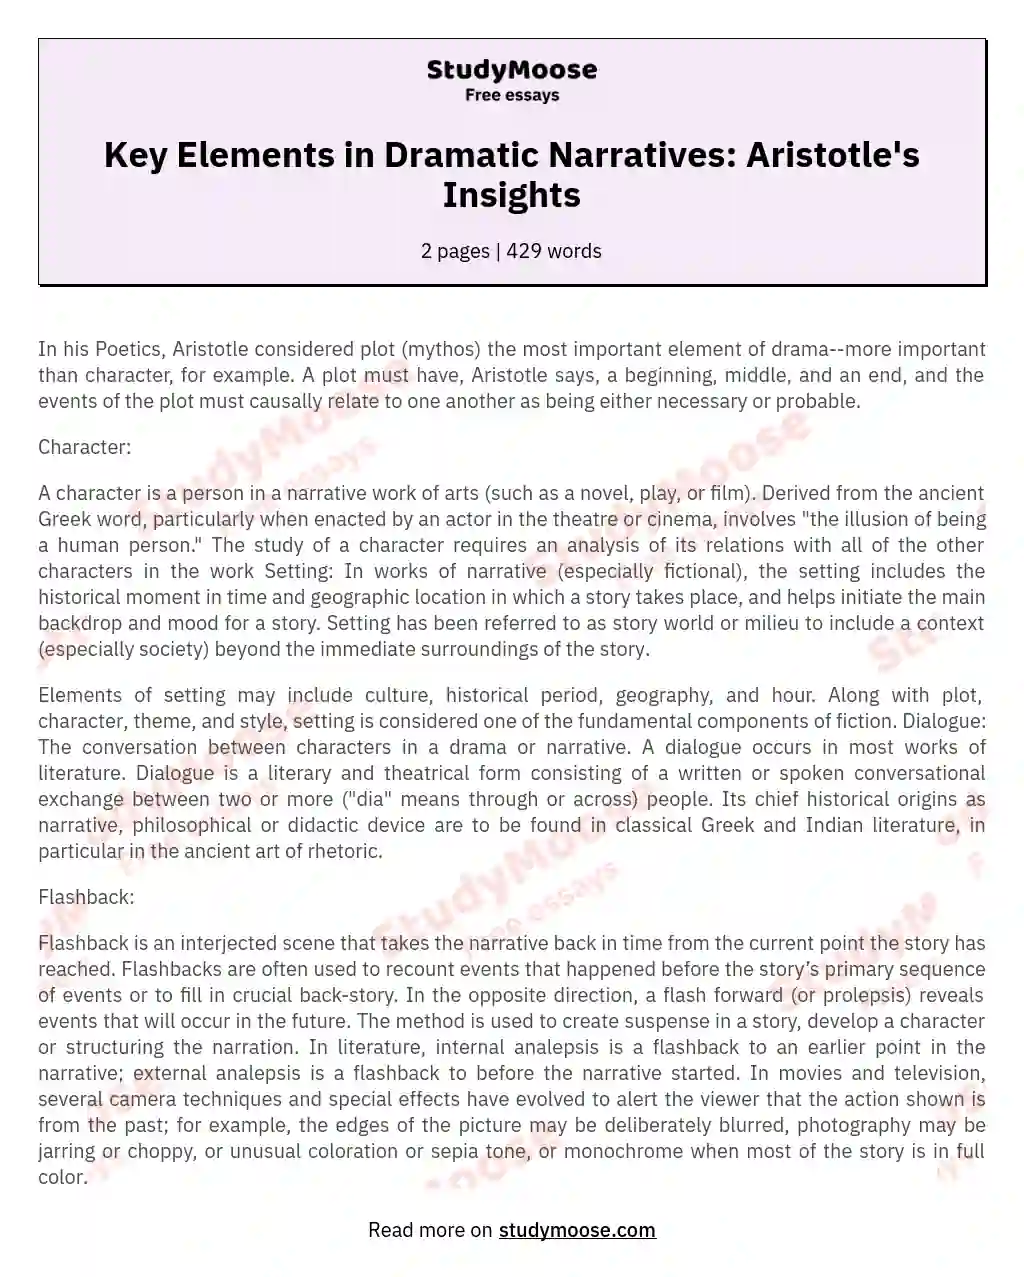 Key Elements in Dramatic Narratives: Aristotle's Insights essay